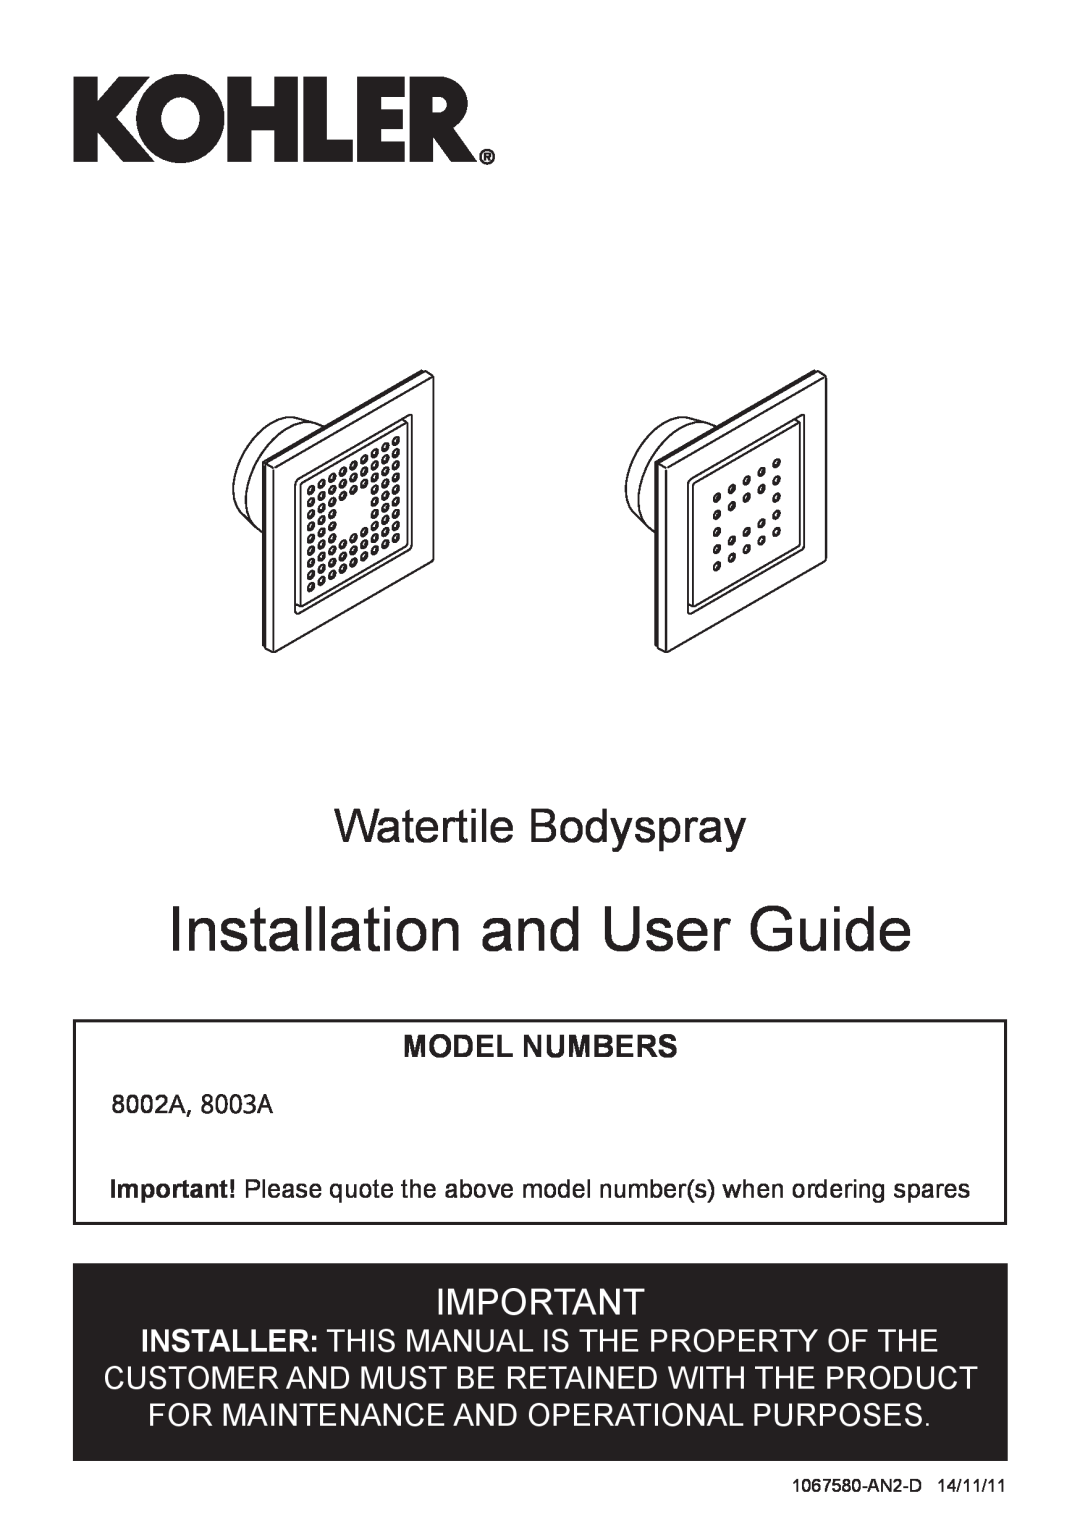 Kohler 8002A manual Installation and User Guide, Watertile Bodyspray, Model Numbers, 1067580-AN2-D14/11/11 